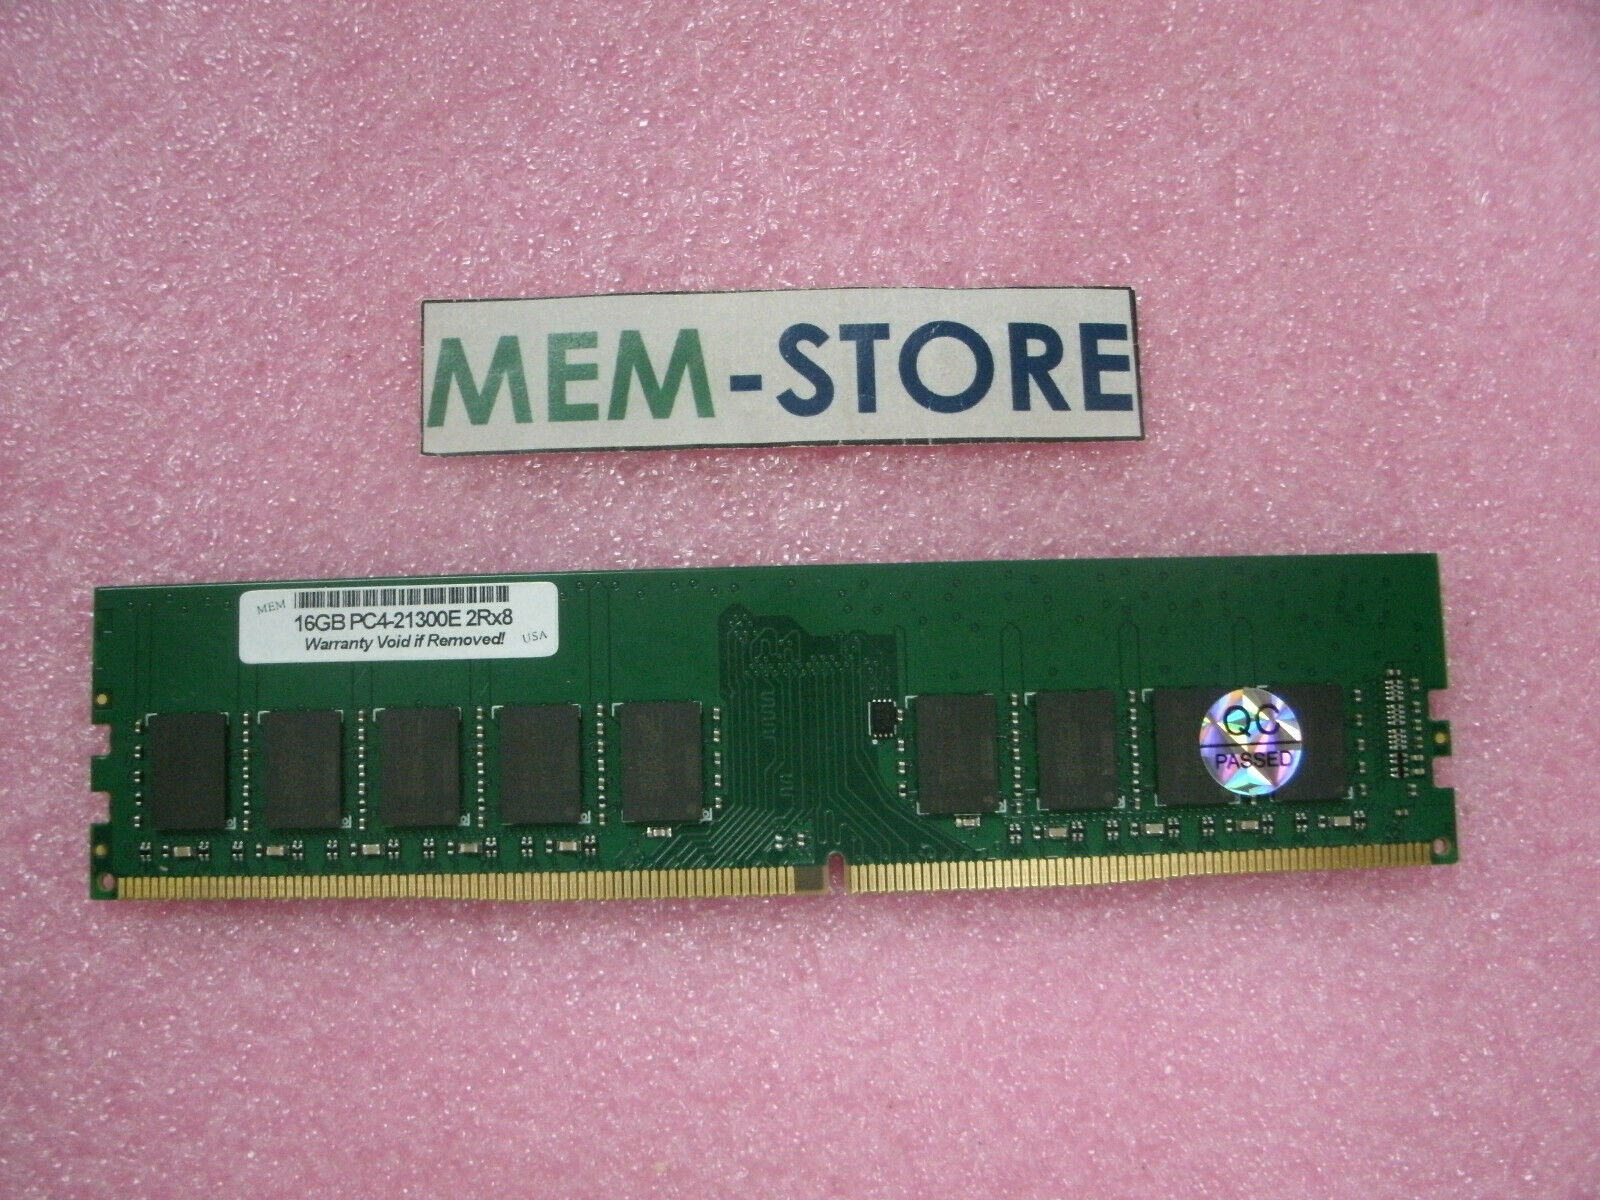 D4EC-2666-16G 16GB ECC UDIMM DDR4-2666 PC4-21300 Memory RackStation RS2818RP+ (3rd Party) - image 1 of 1